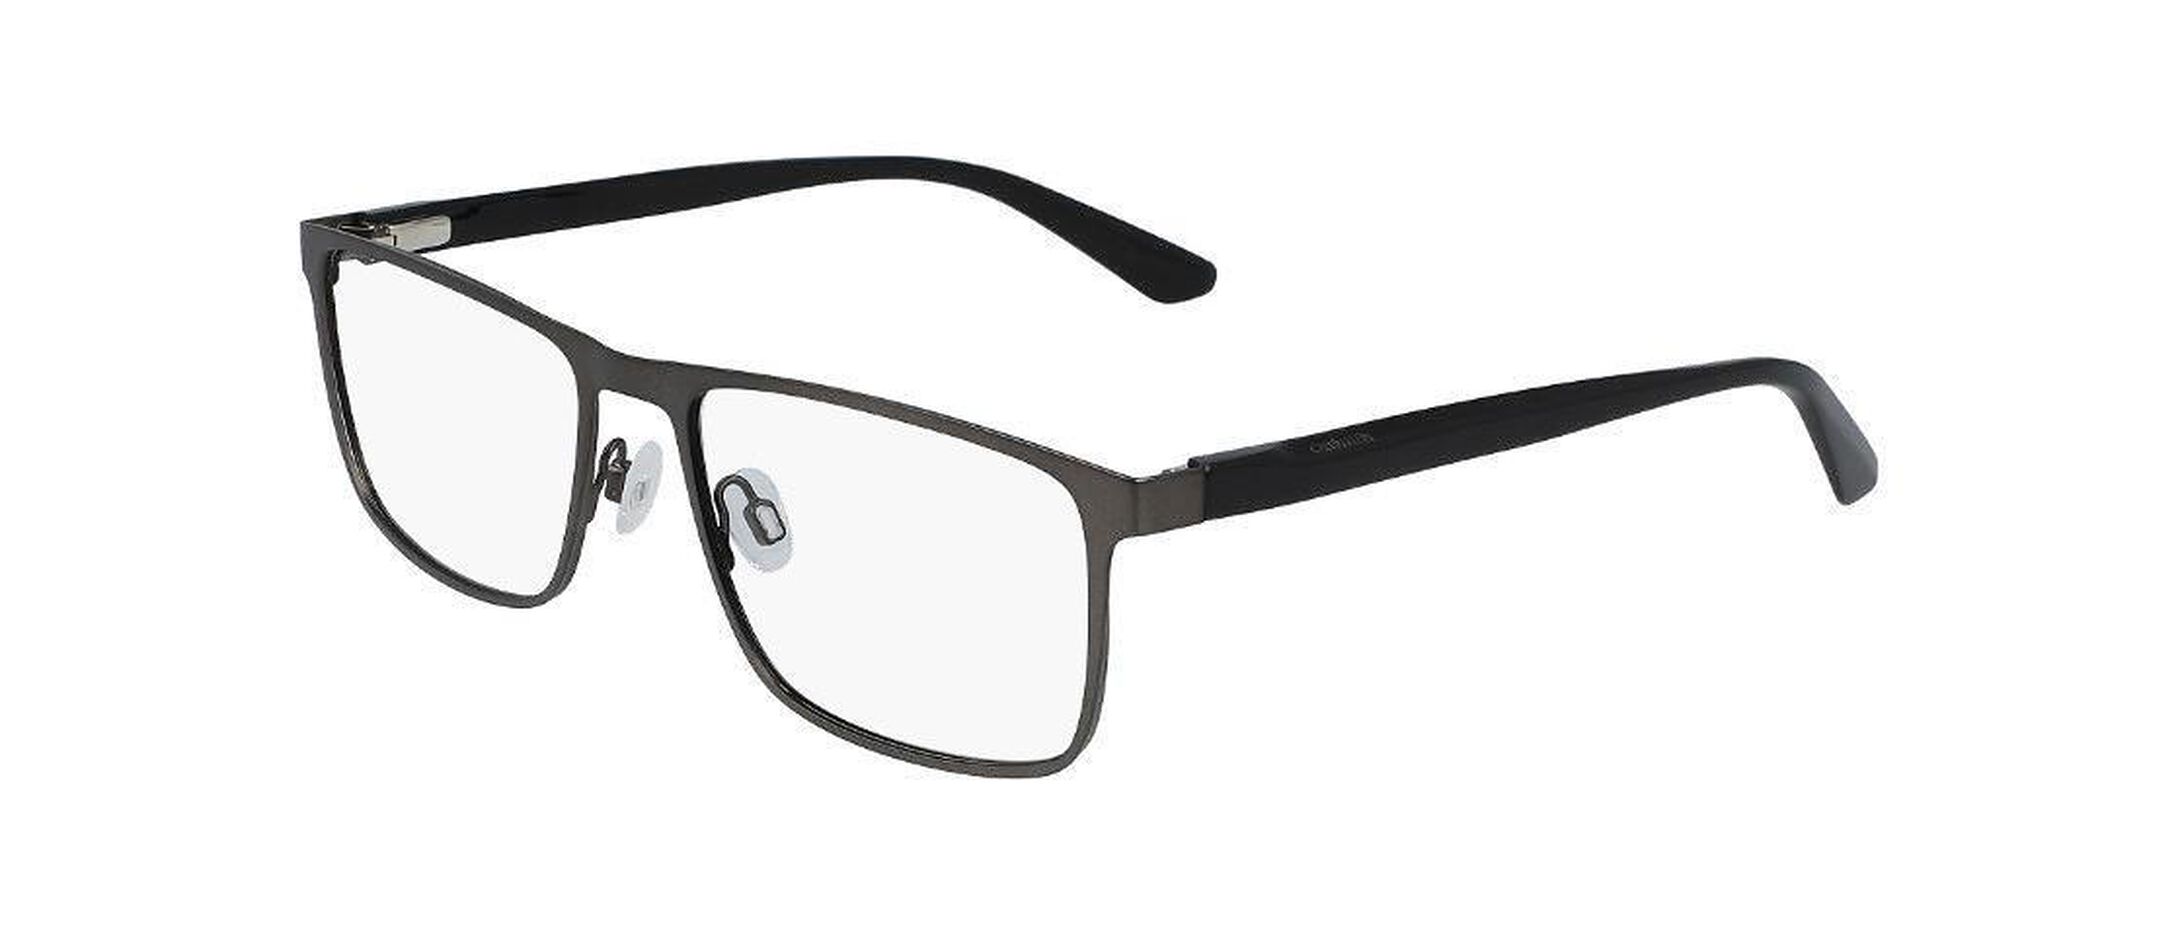 Calvin Klein CK20316 Glasses | Free Shipping and Returns | Eyeconic